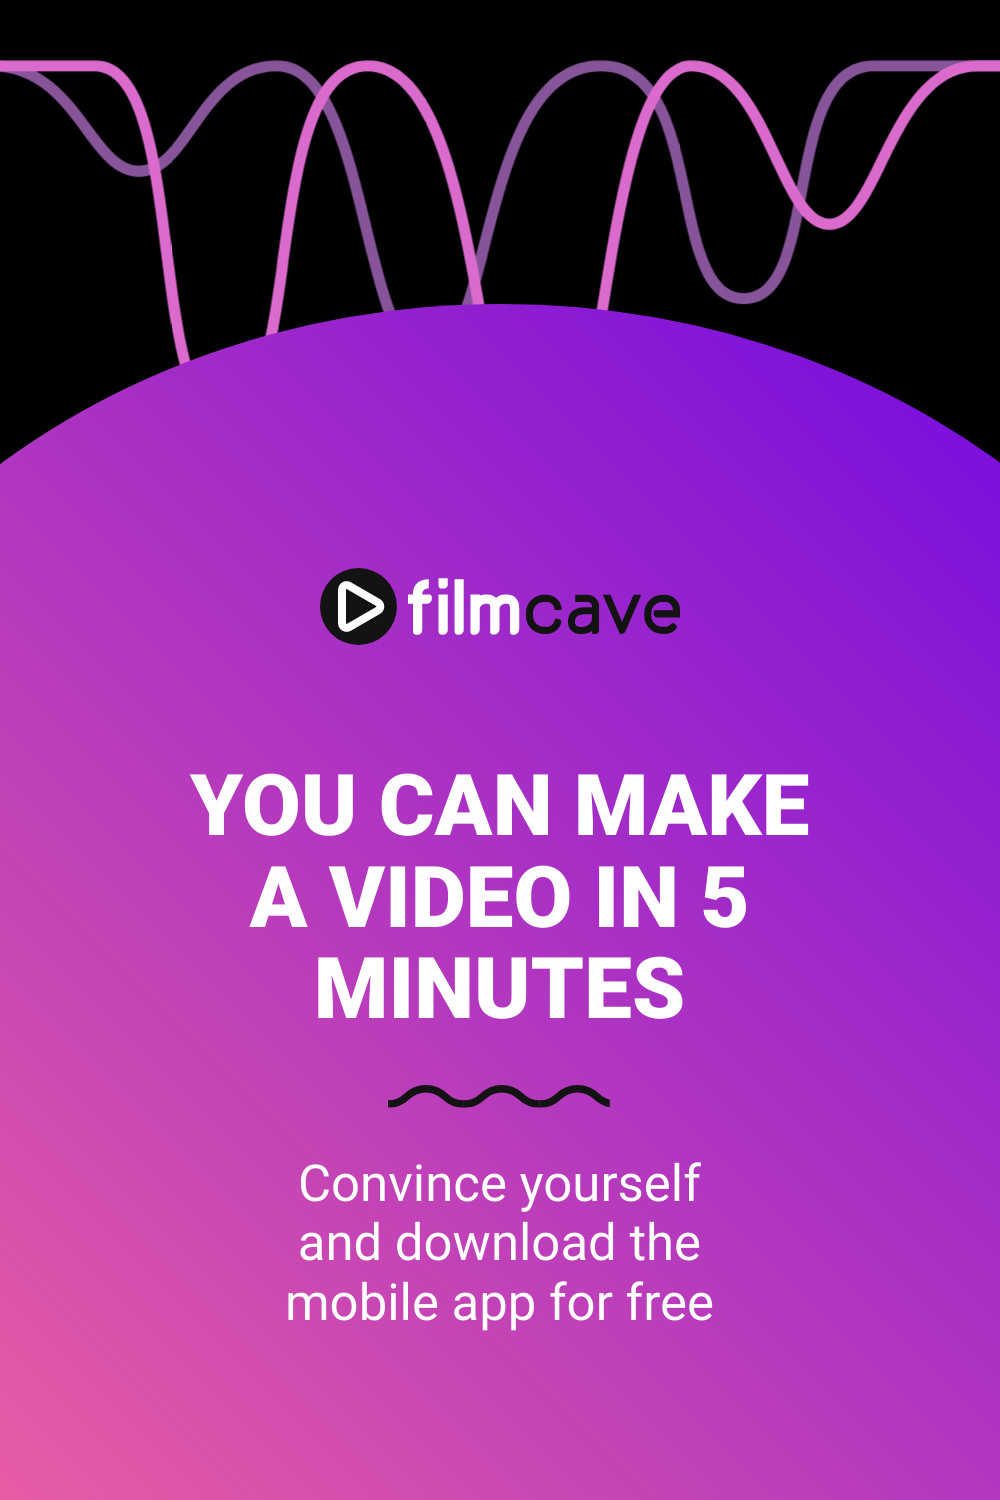 Make a Video in 5 Minutes